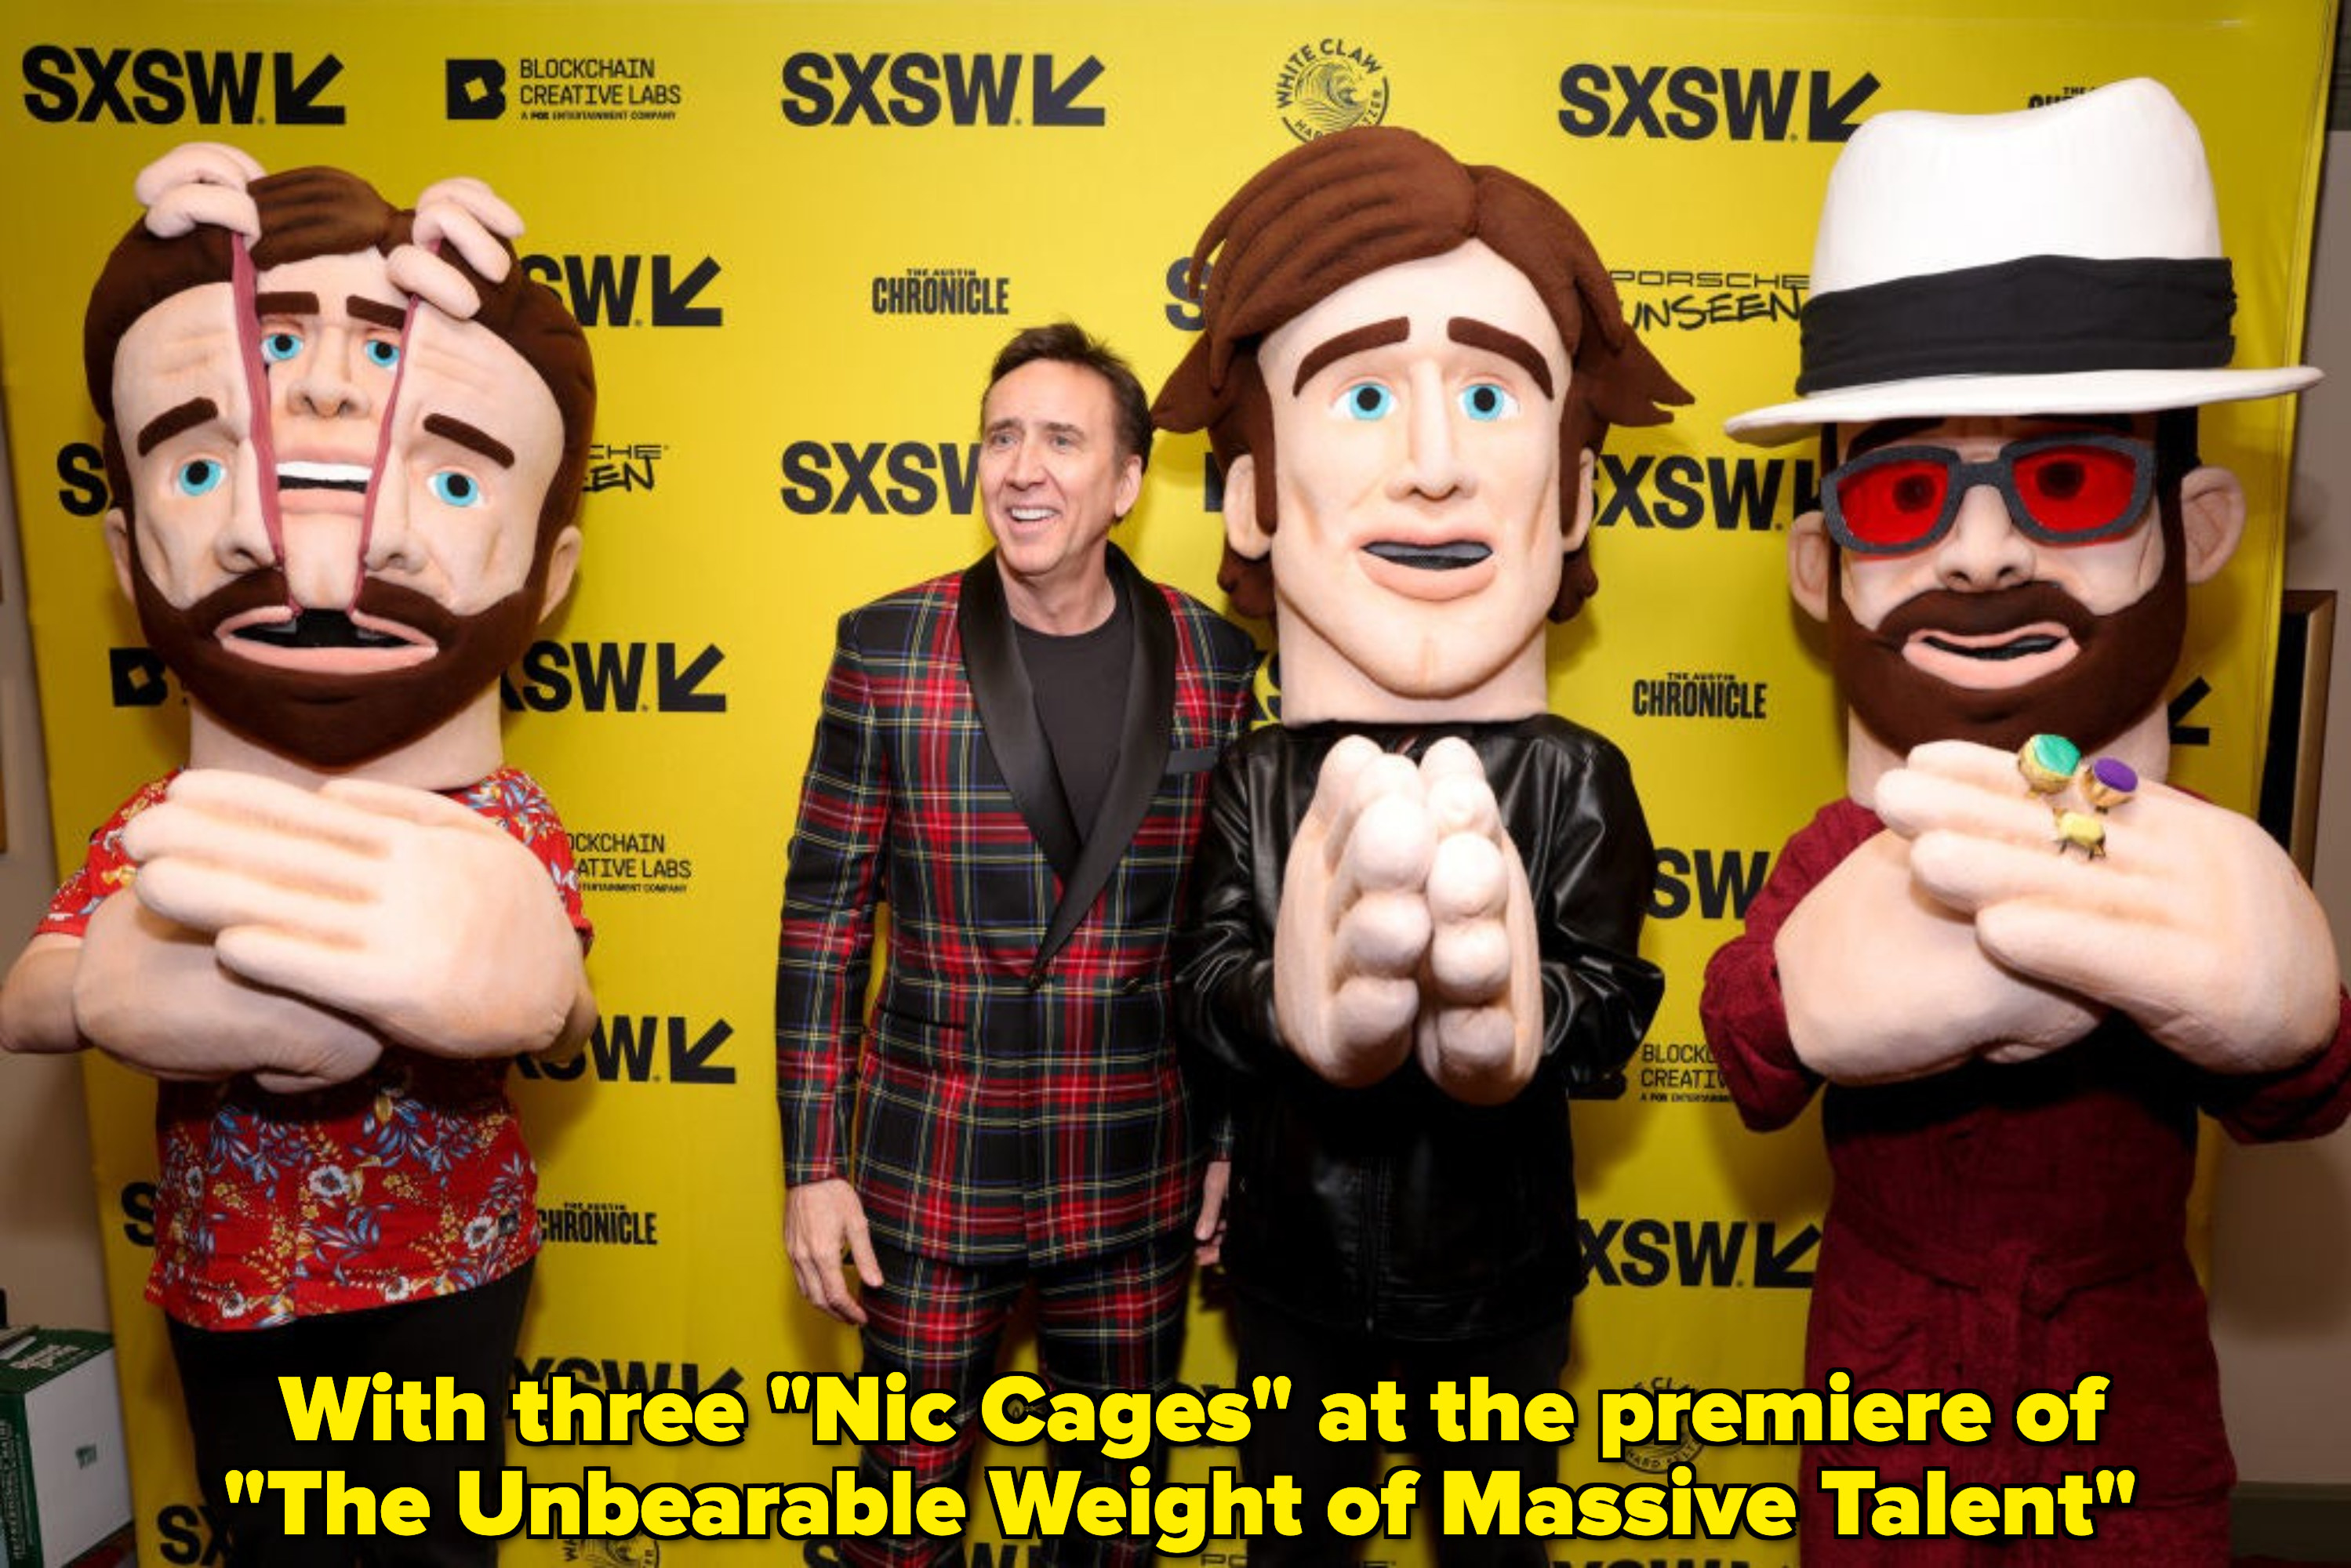 Three cartoon statues of Nic Cage and him standing next to them at SXSW